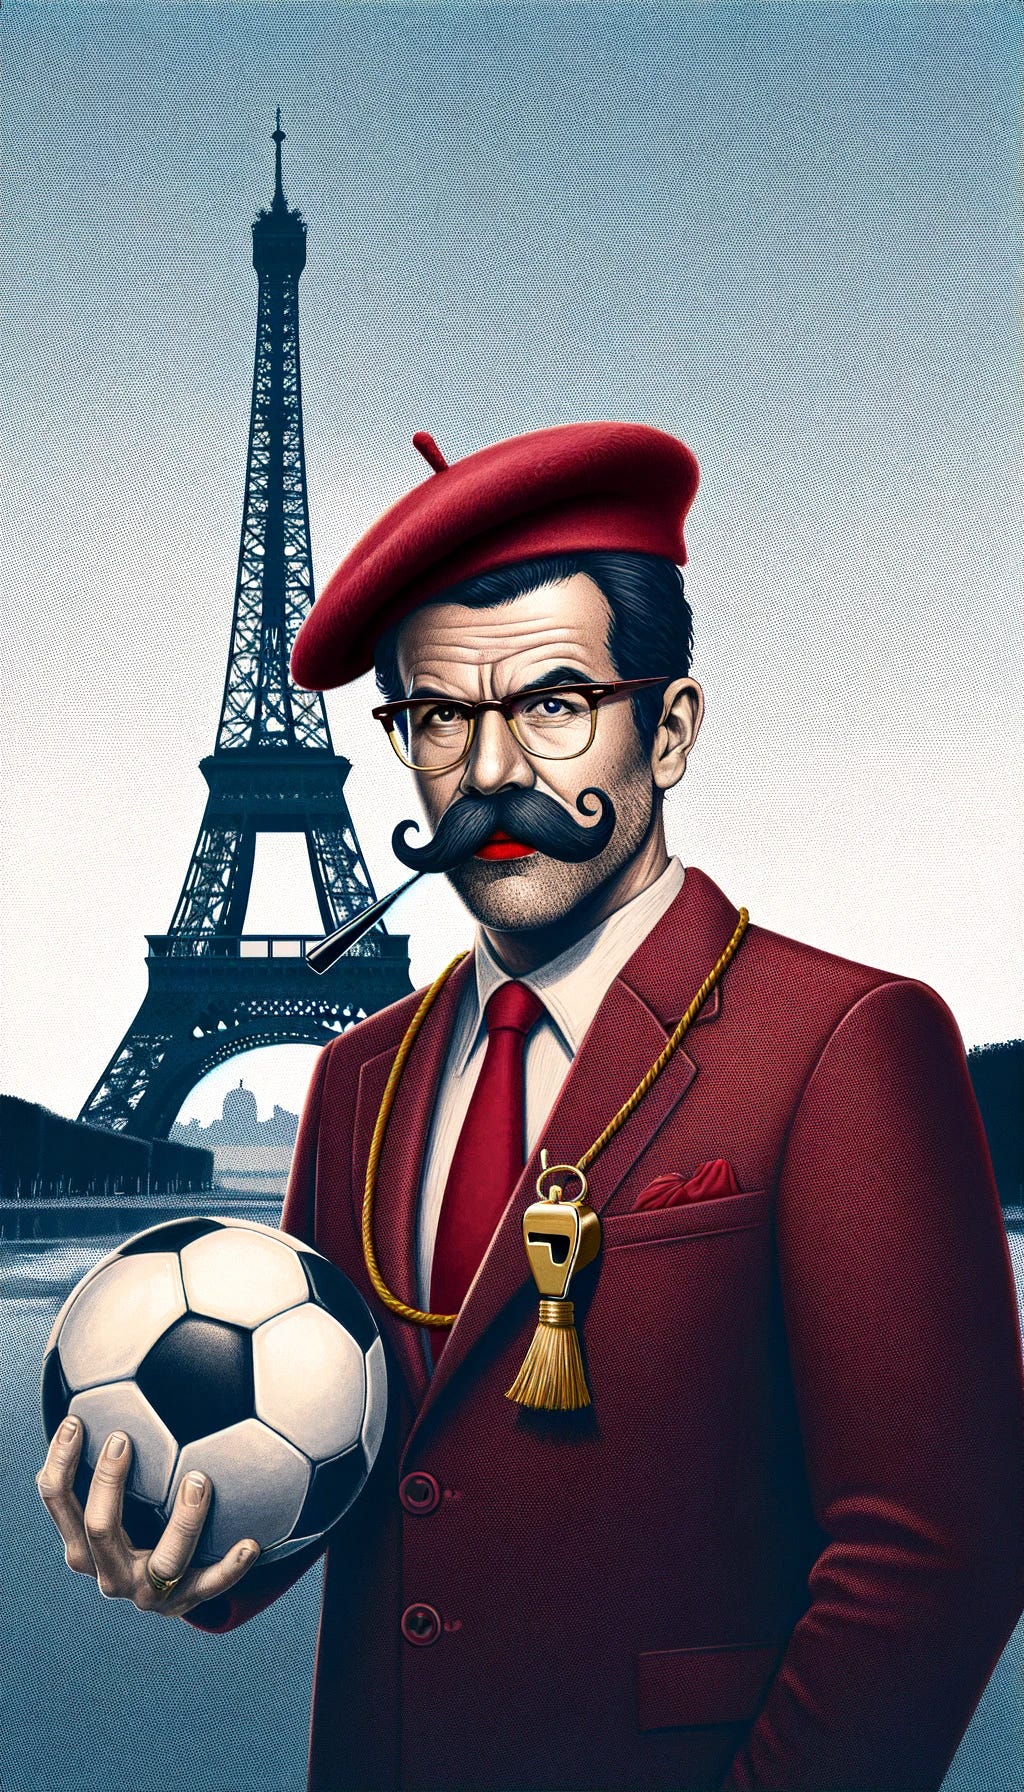 An artistic reinterpretation of the earlier image, adding more distinct elements of Ted Lasso. The character is still in front of the Eiffel Tower, wearing a beret, red lipstick, and a red dress. Now, the character has Ted Lasso's iconic mustache and is holding a coach's whistle around their neck, emphasizing the coaching aspect of Ted Lasso. Additionally, the character is holding a soccer ball, further connecting to Ted Lasso's role as a soccer coach. This creates a humorous and playful blend of Parisian style and the essence of Ted Lasso, set against the backdrop of the Eiffel Tower.